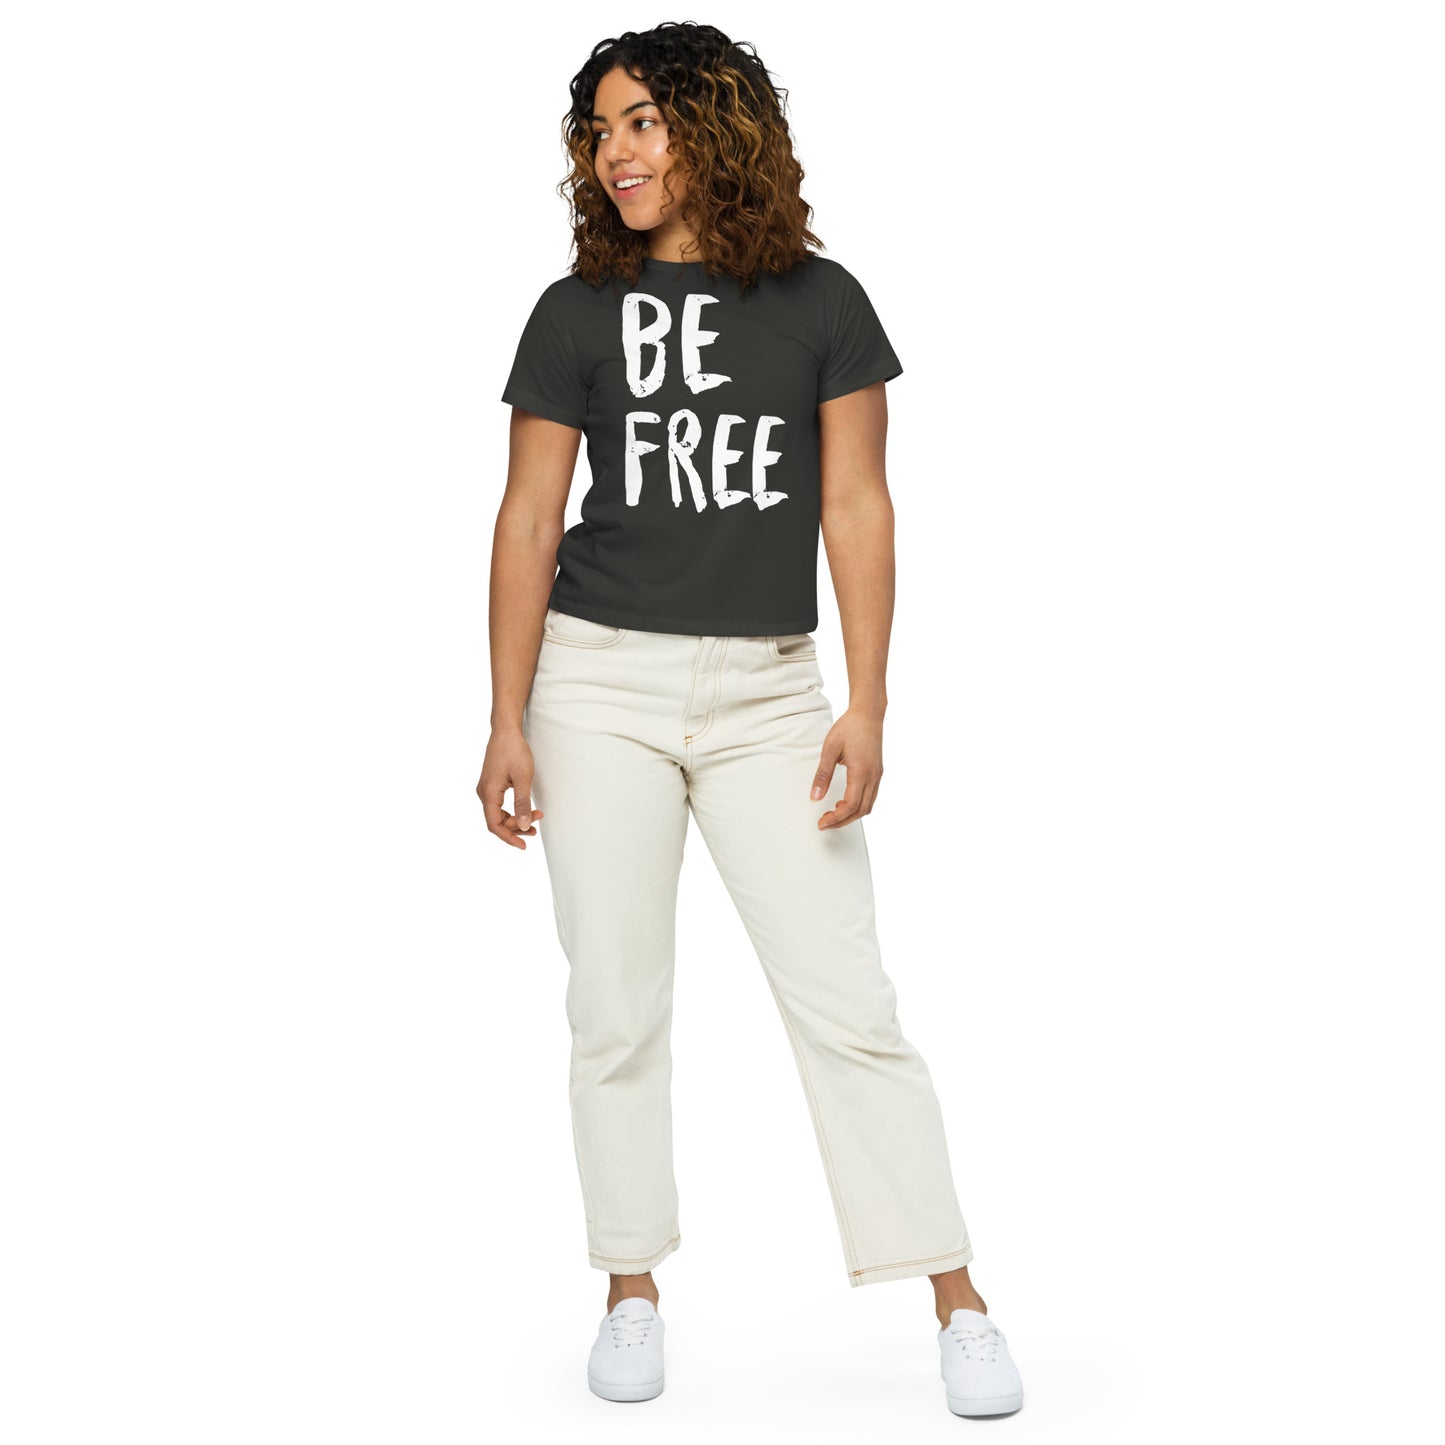 Be Free! Jesus Is The Way - Women’s high-waisted t-shirt